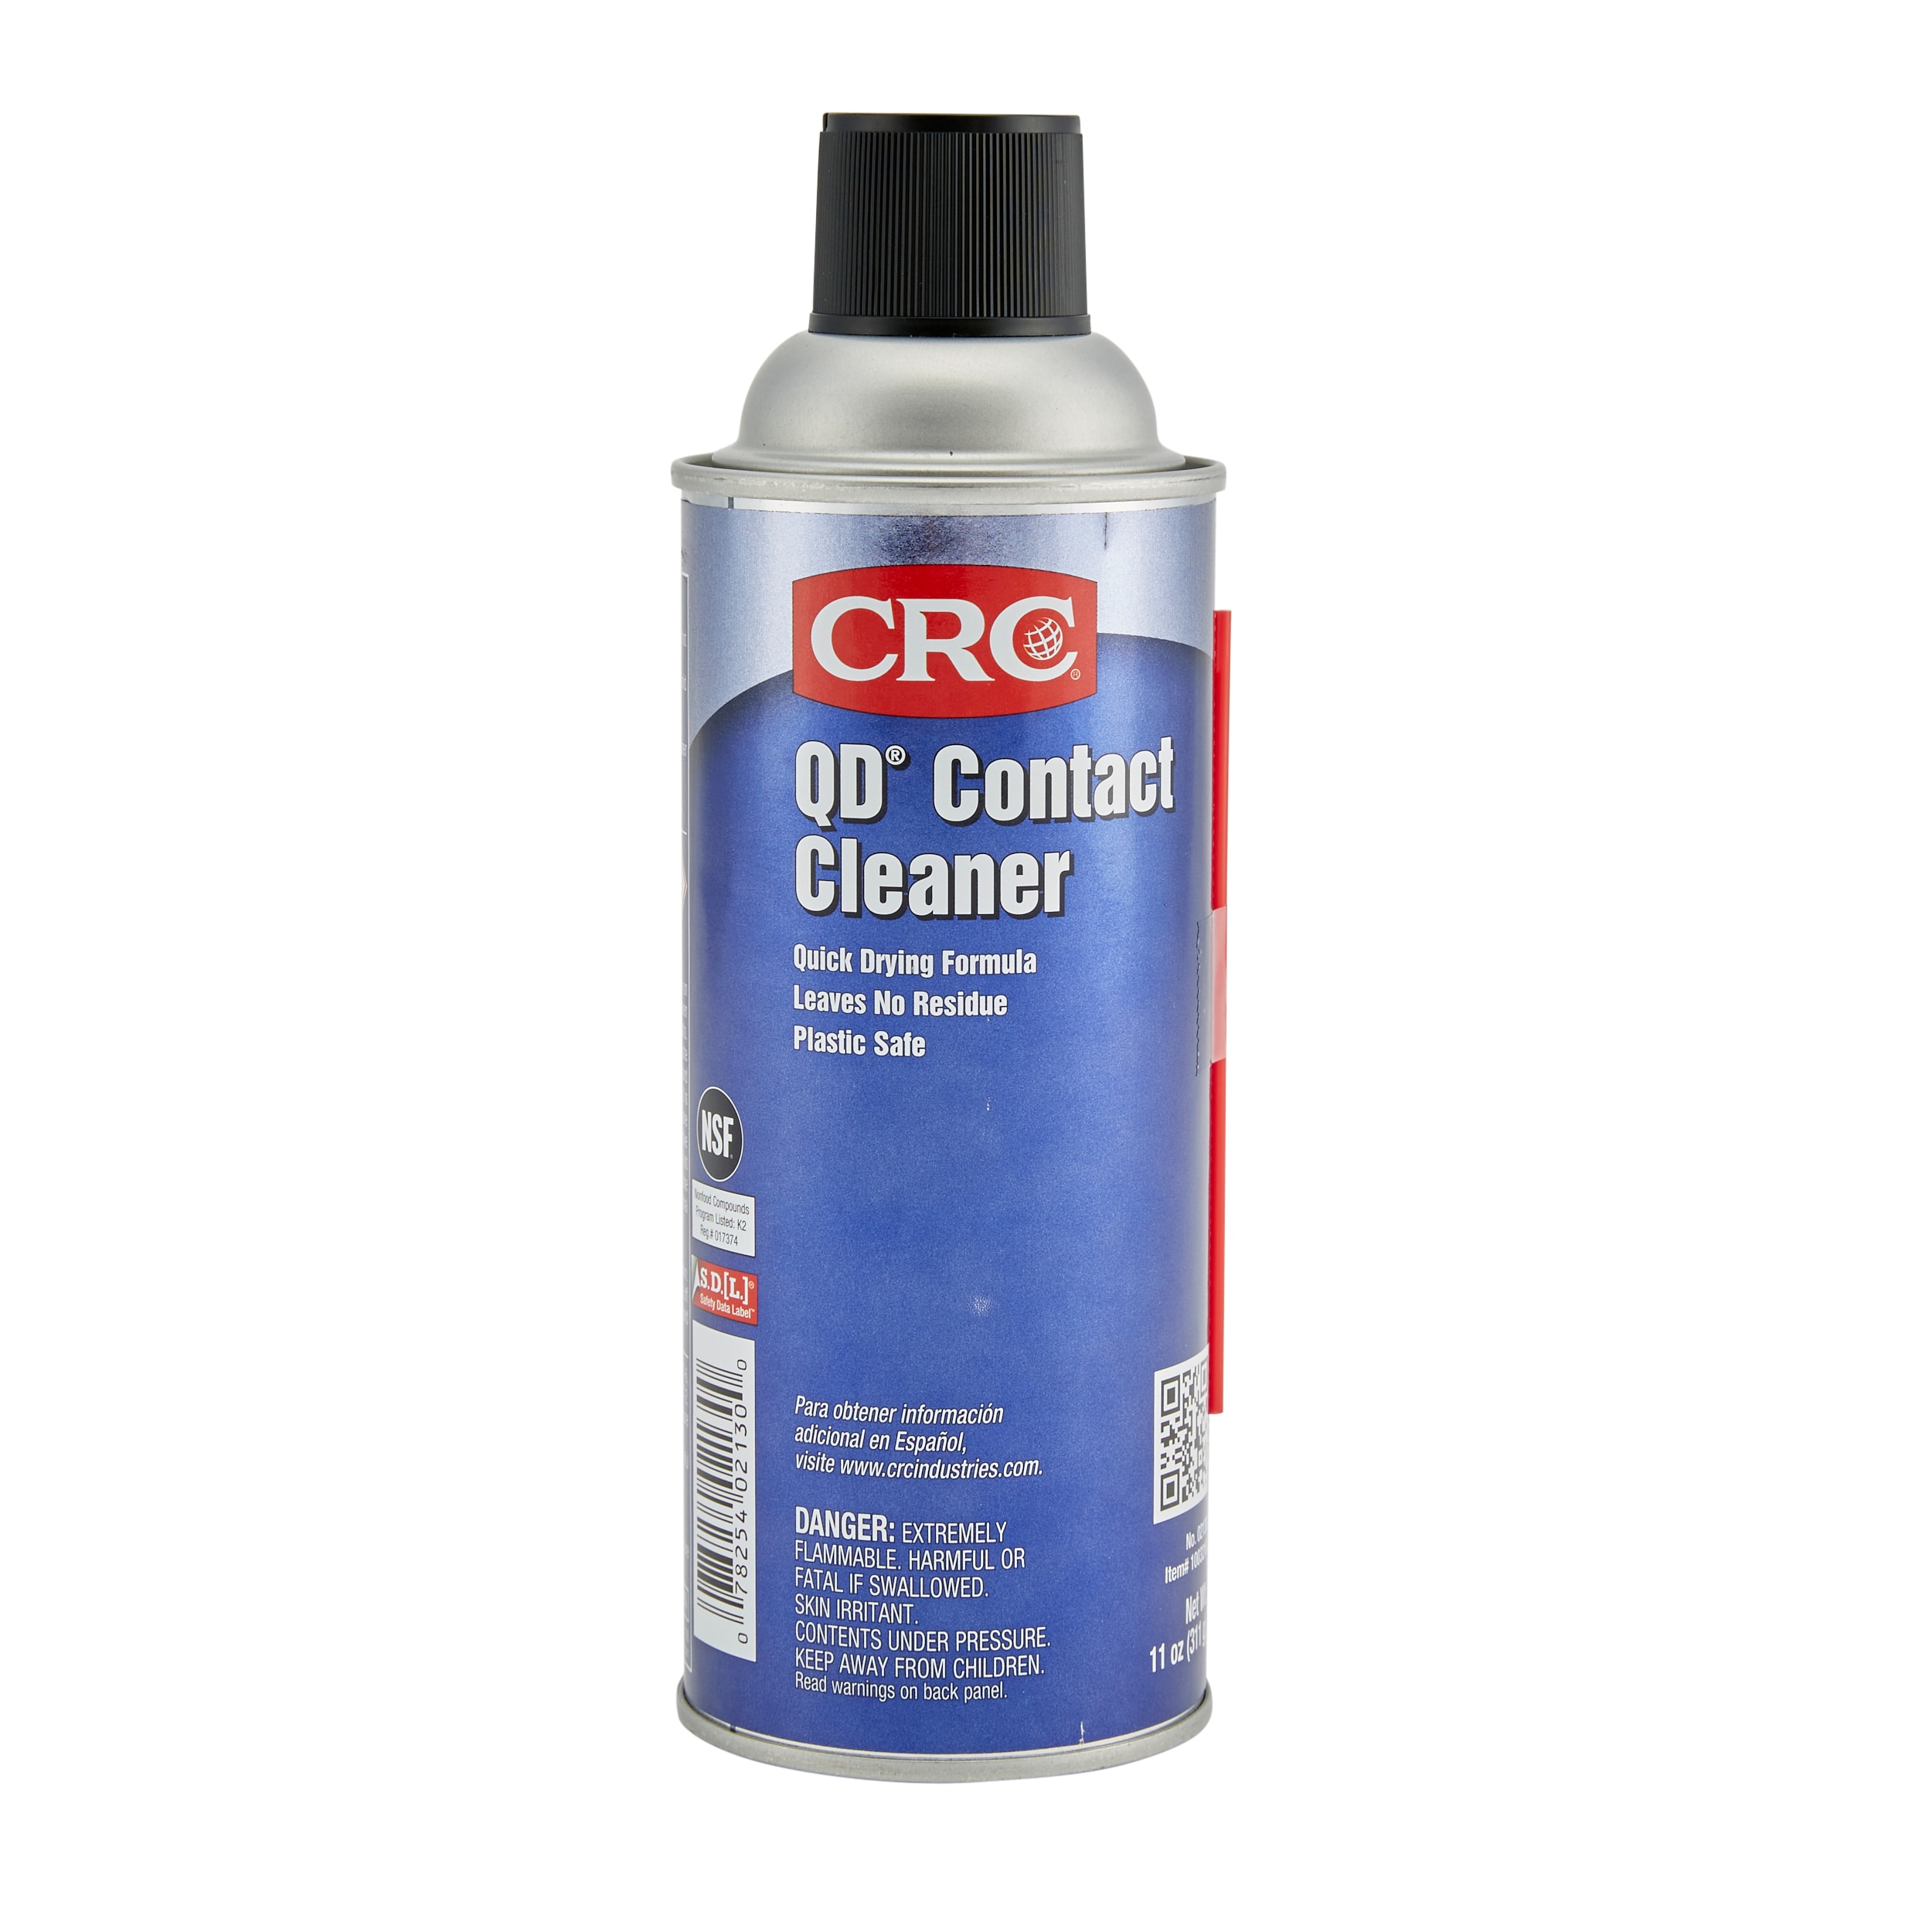 CRC QD Contact Cleaner 11 oz. - Fast Evaporating, Residue-Free, Safe for  Electronics - NSF K2 Registered